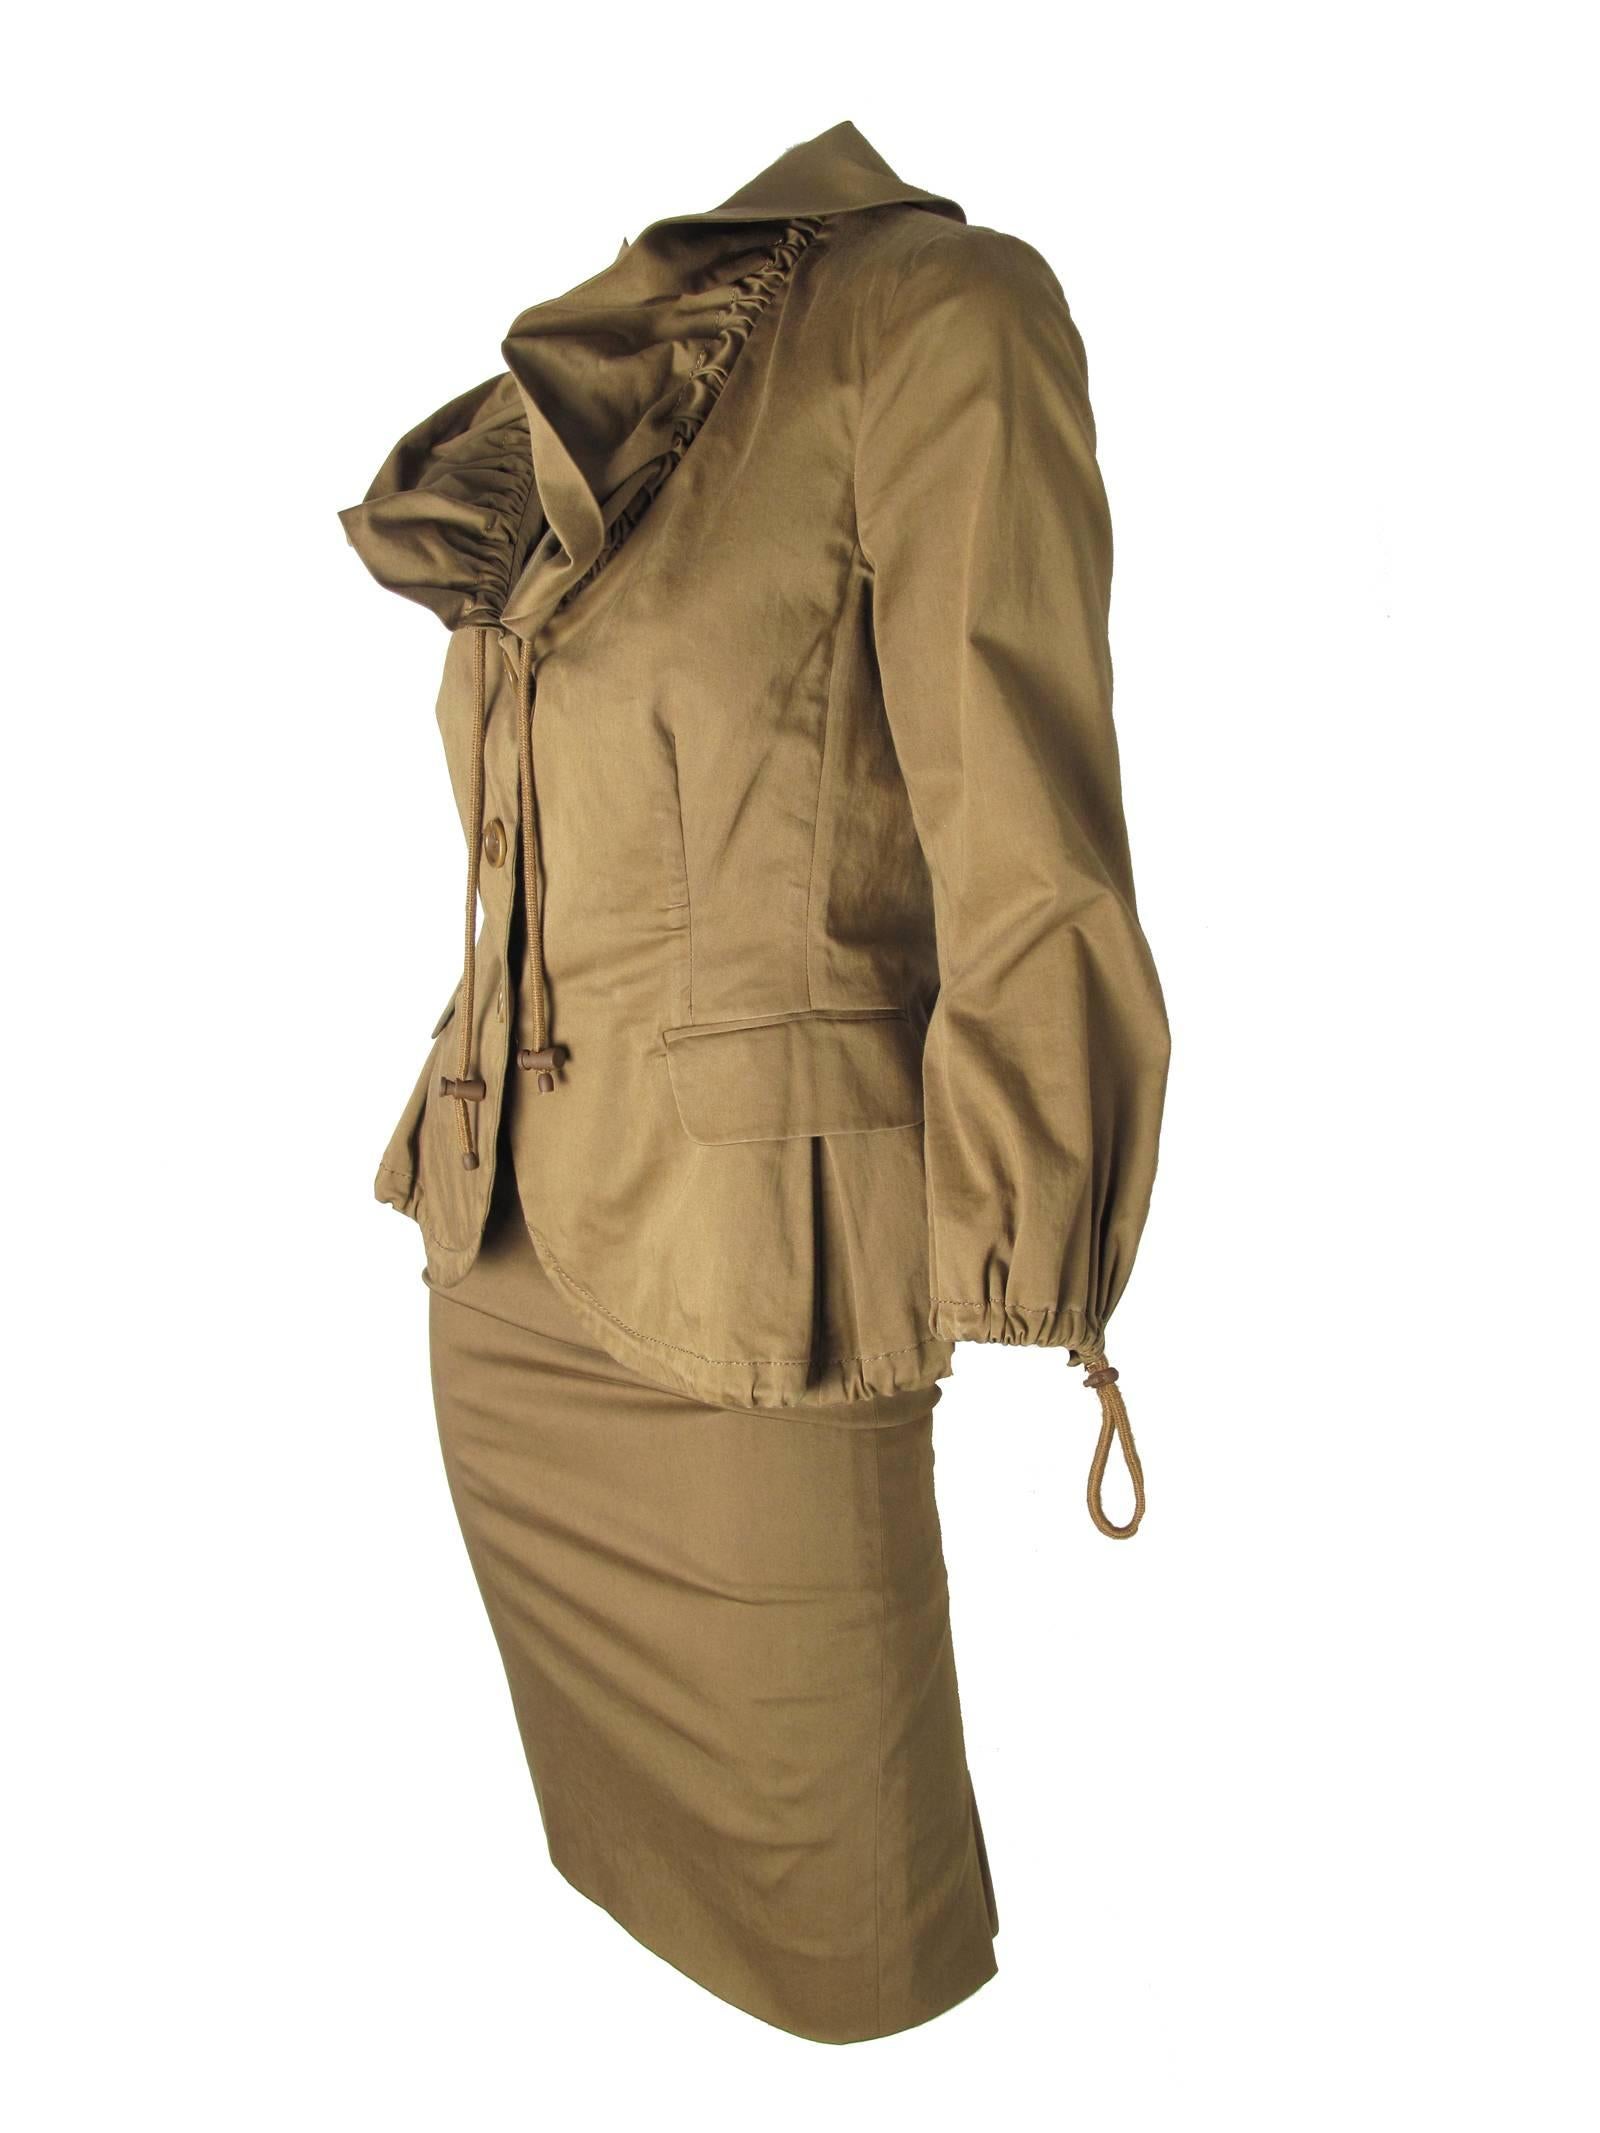 Moschino Cheap & Chic brown cotton skirt suit with ruffled collar jacket, drawstrings at collar,  cuffs, and hem.  Two front pockets, buttons down front. Size US 4, France 34, Italy 38

Skirt: 27